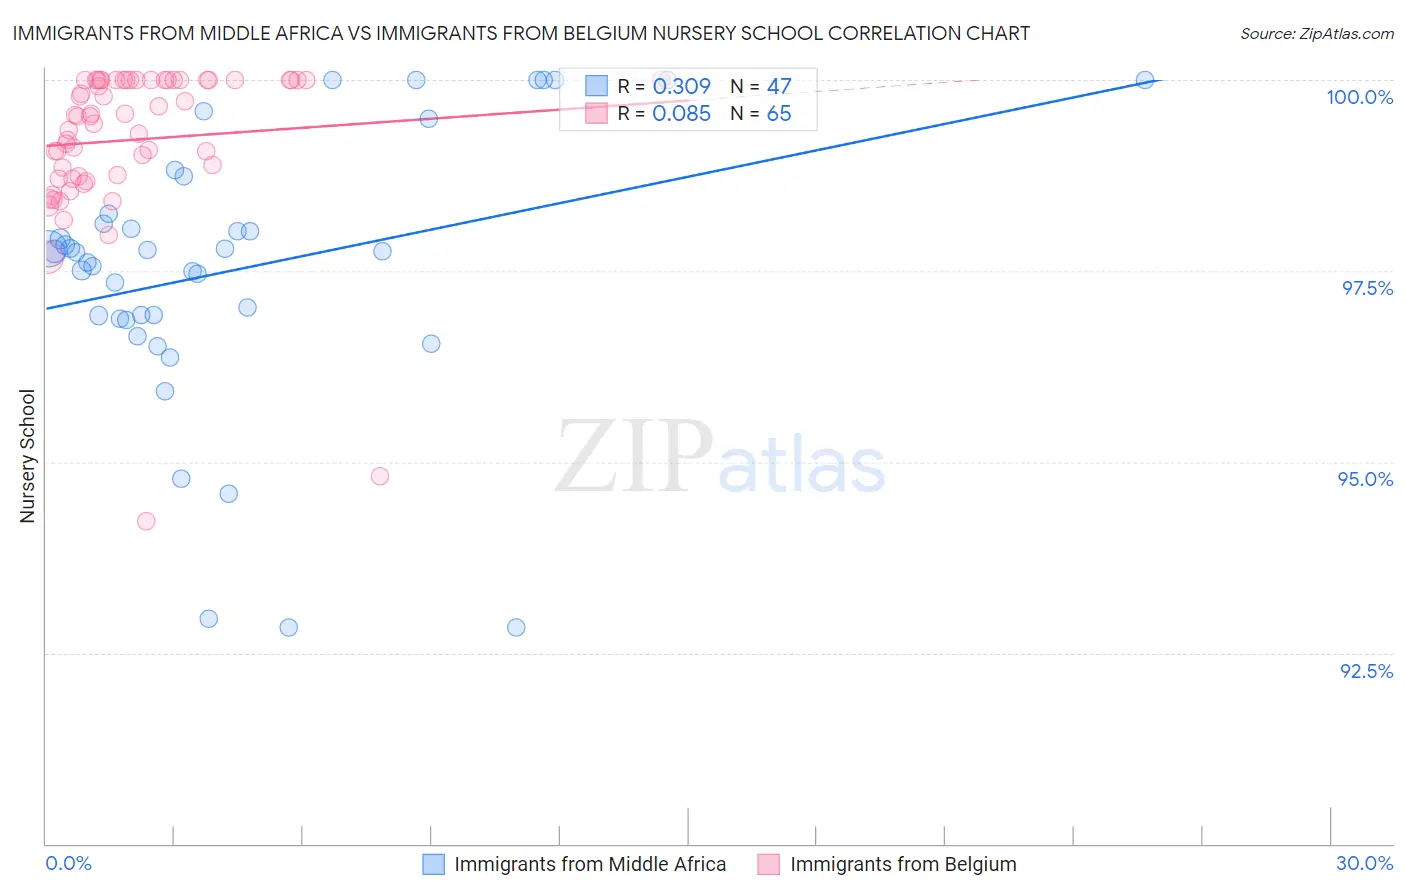 Immigrants from Middle Africa vs Immigrants from Belgium Nursery School